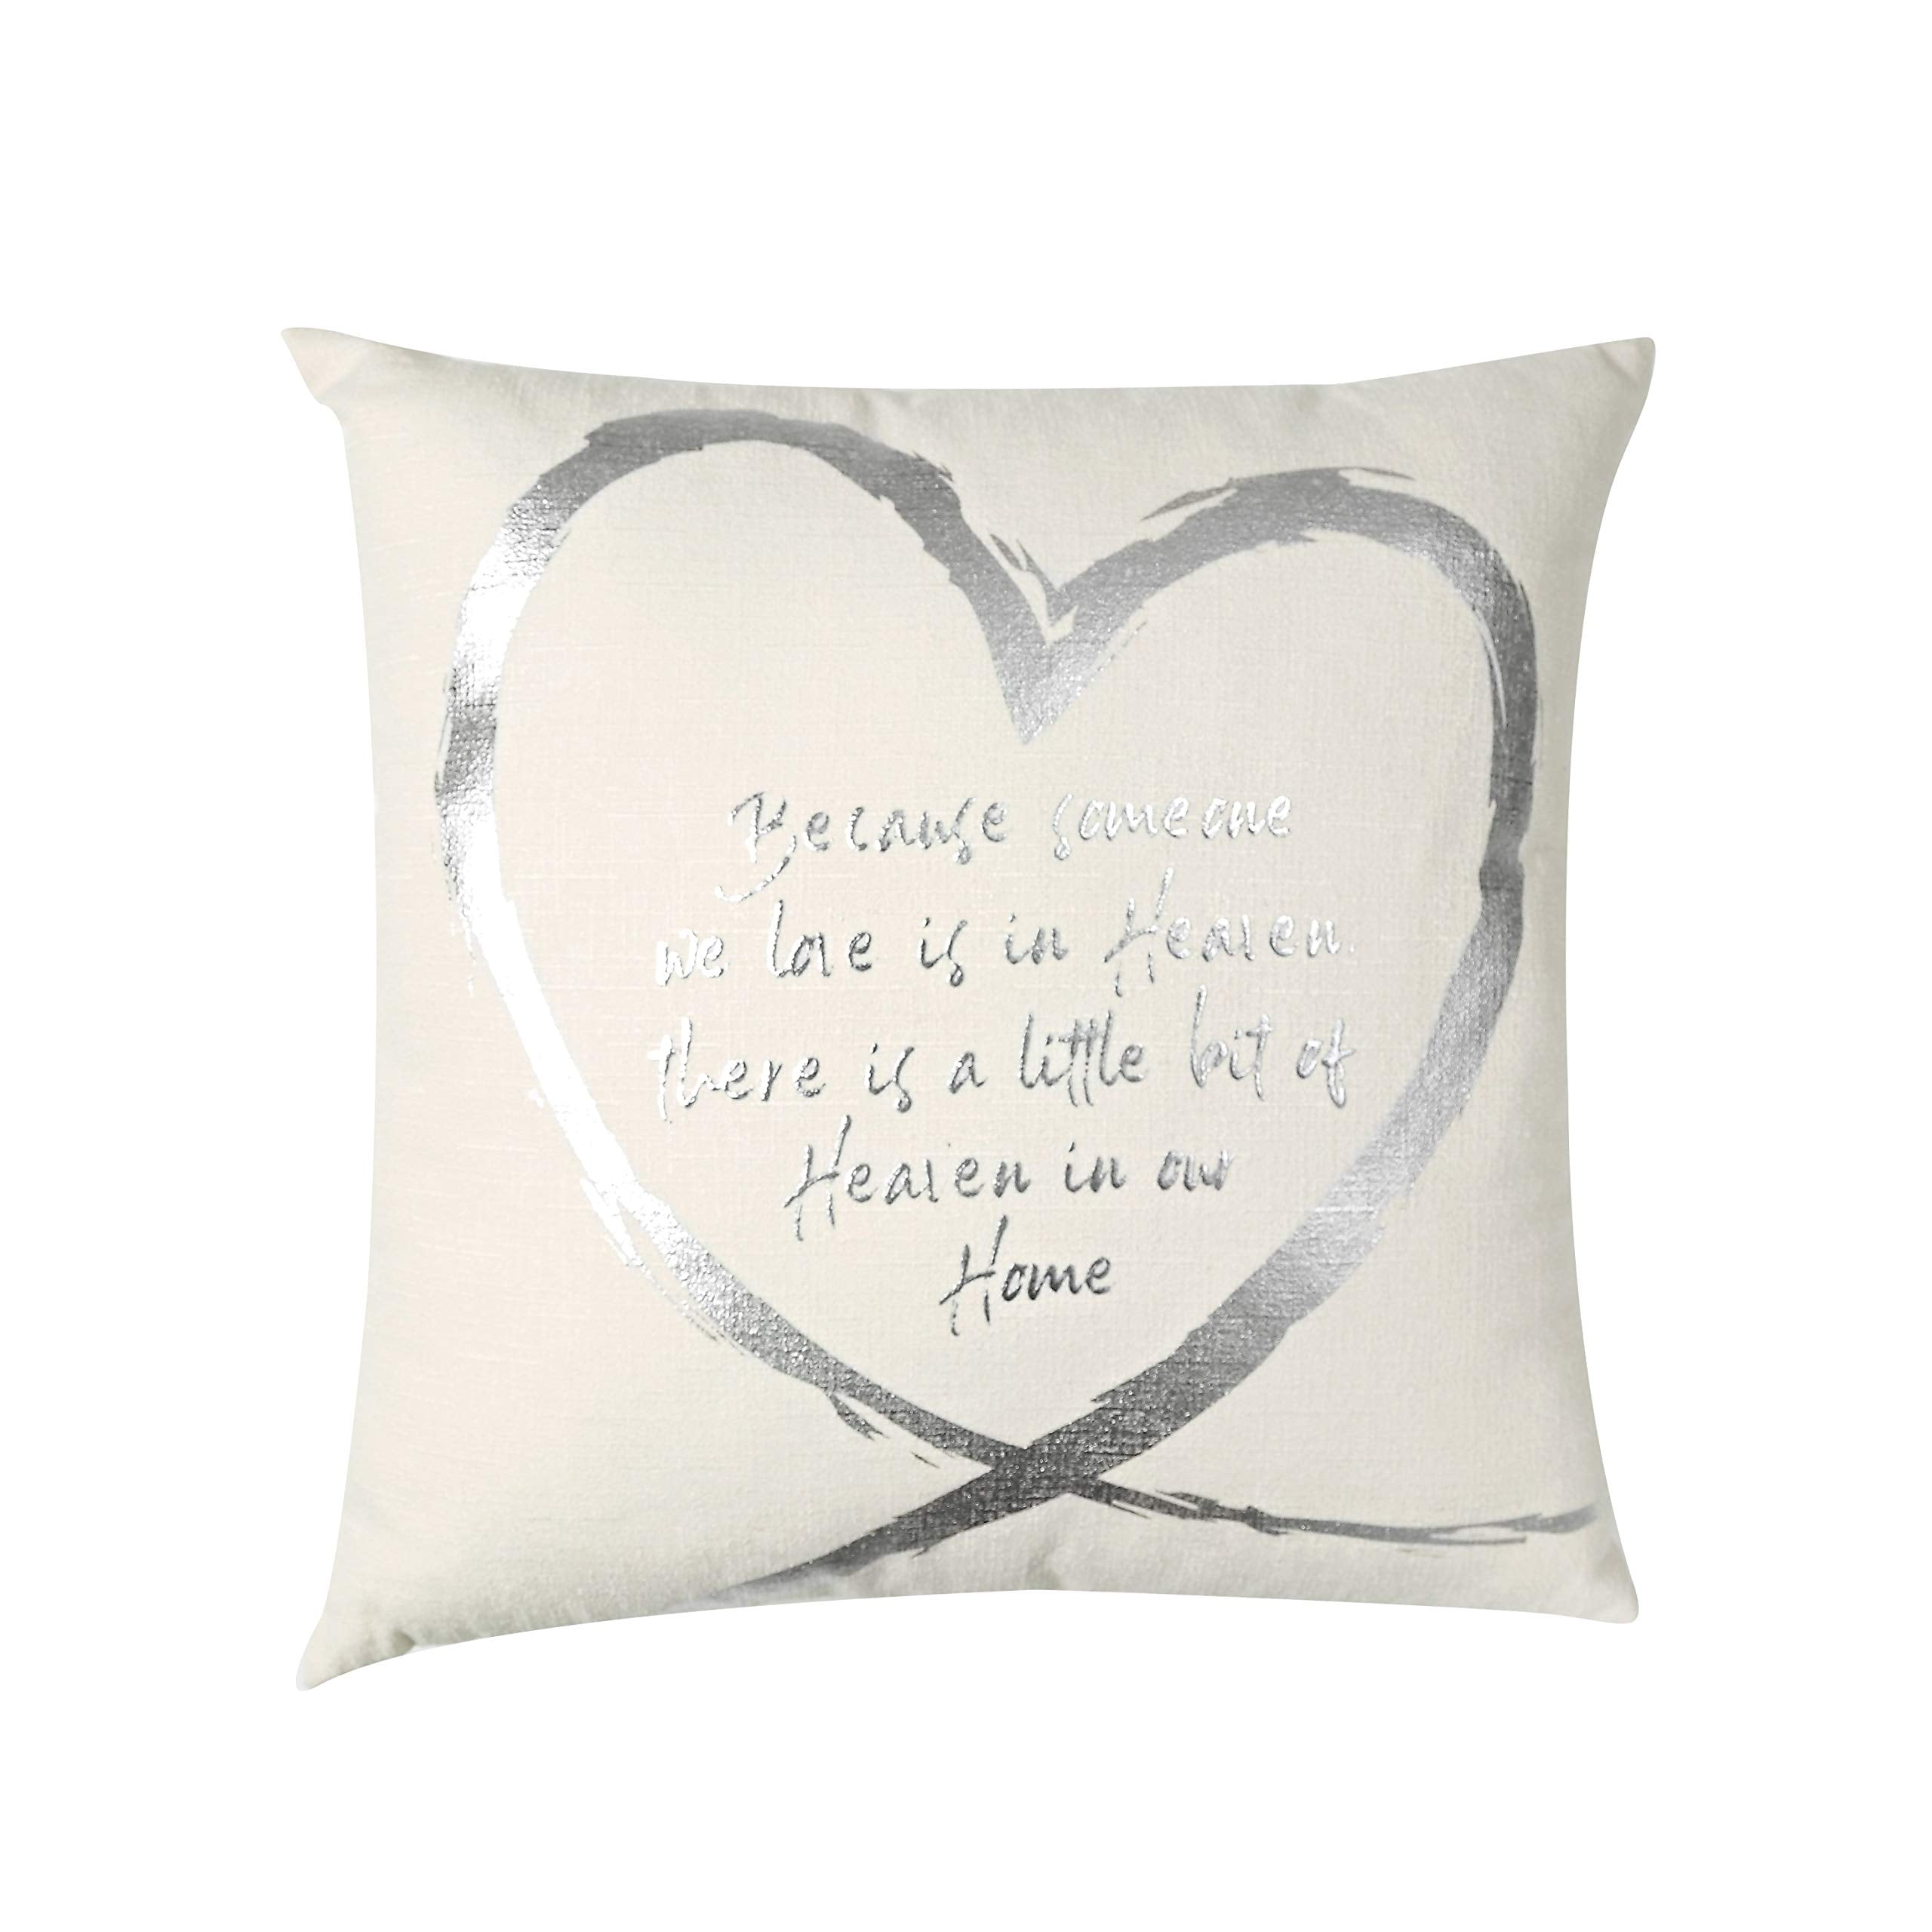 a Because Someone We Love Is In Heaven Theres Little Bit Of Heaven In Home Butterfly Flower Cotton Linen Throw Pillow Cover Cushion Case Holiday Square 18X18Inch Gift Decorative Pillow Family 